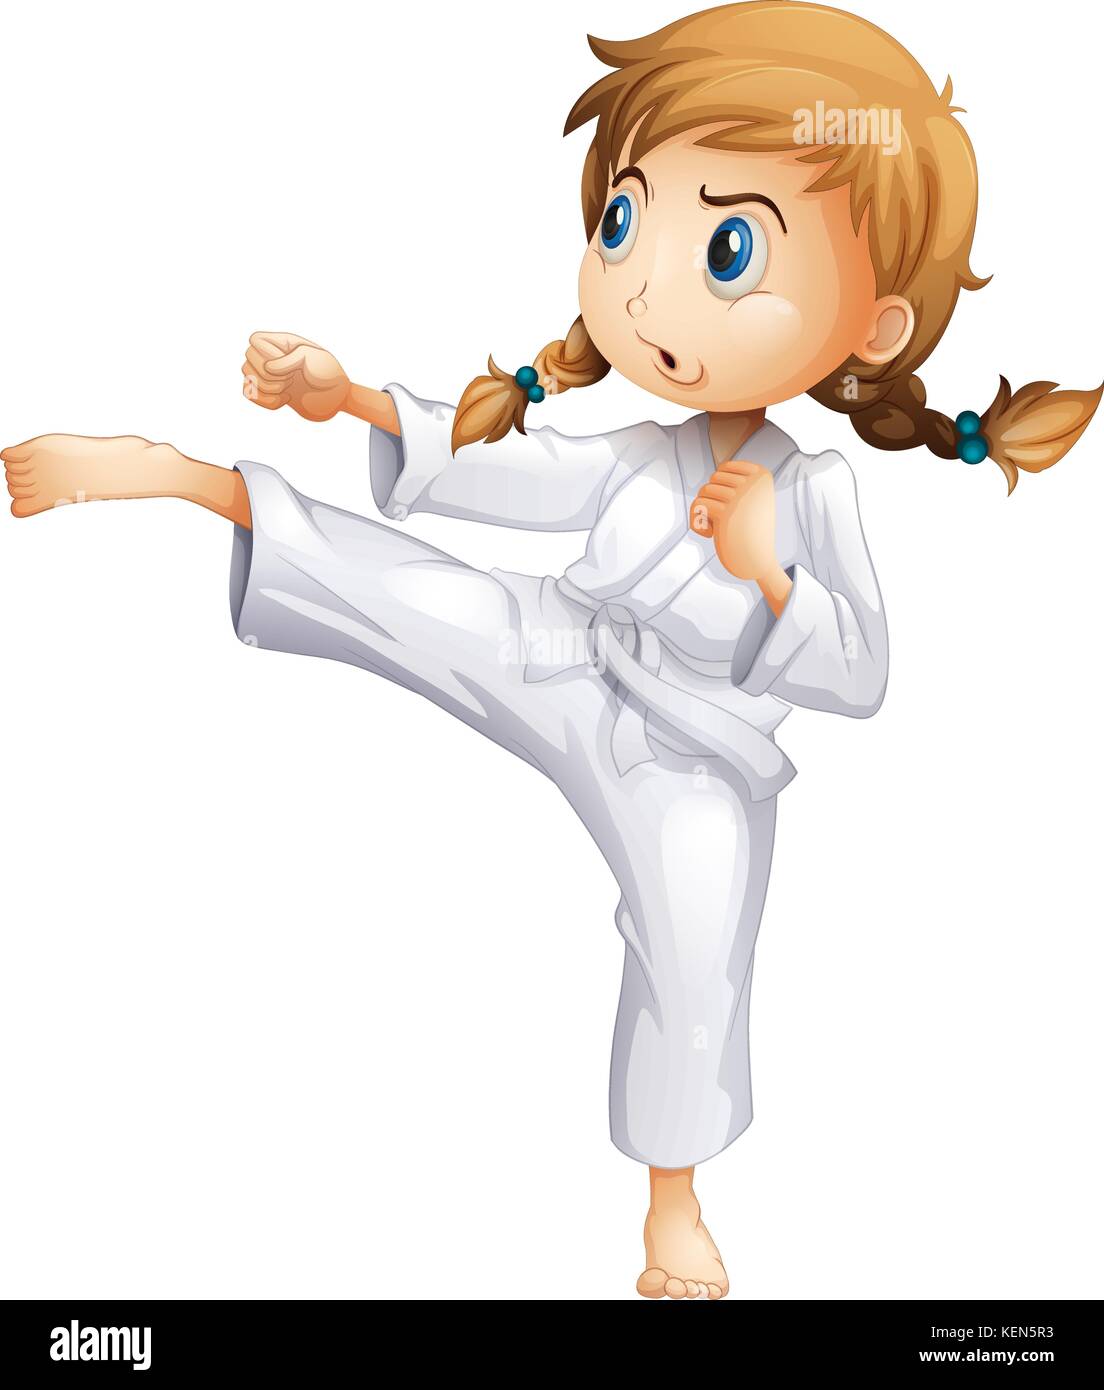 Illustration of a brave girl doing karate on a white background Stock Vector